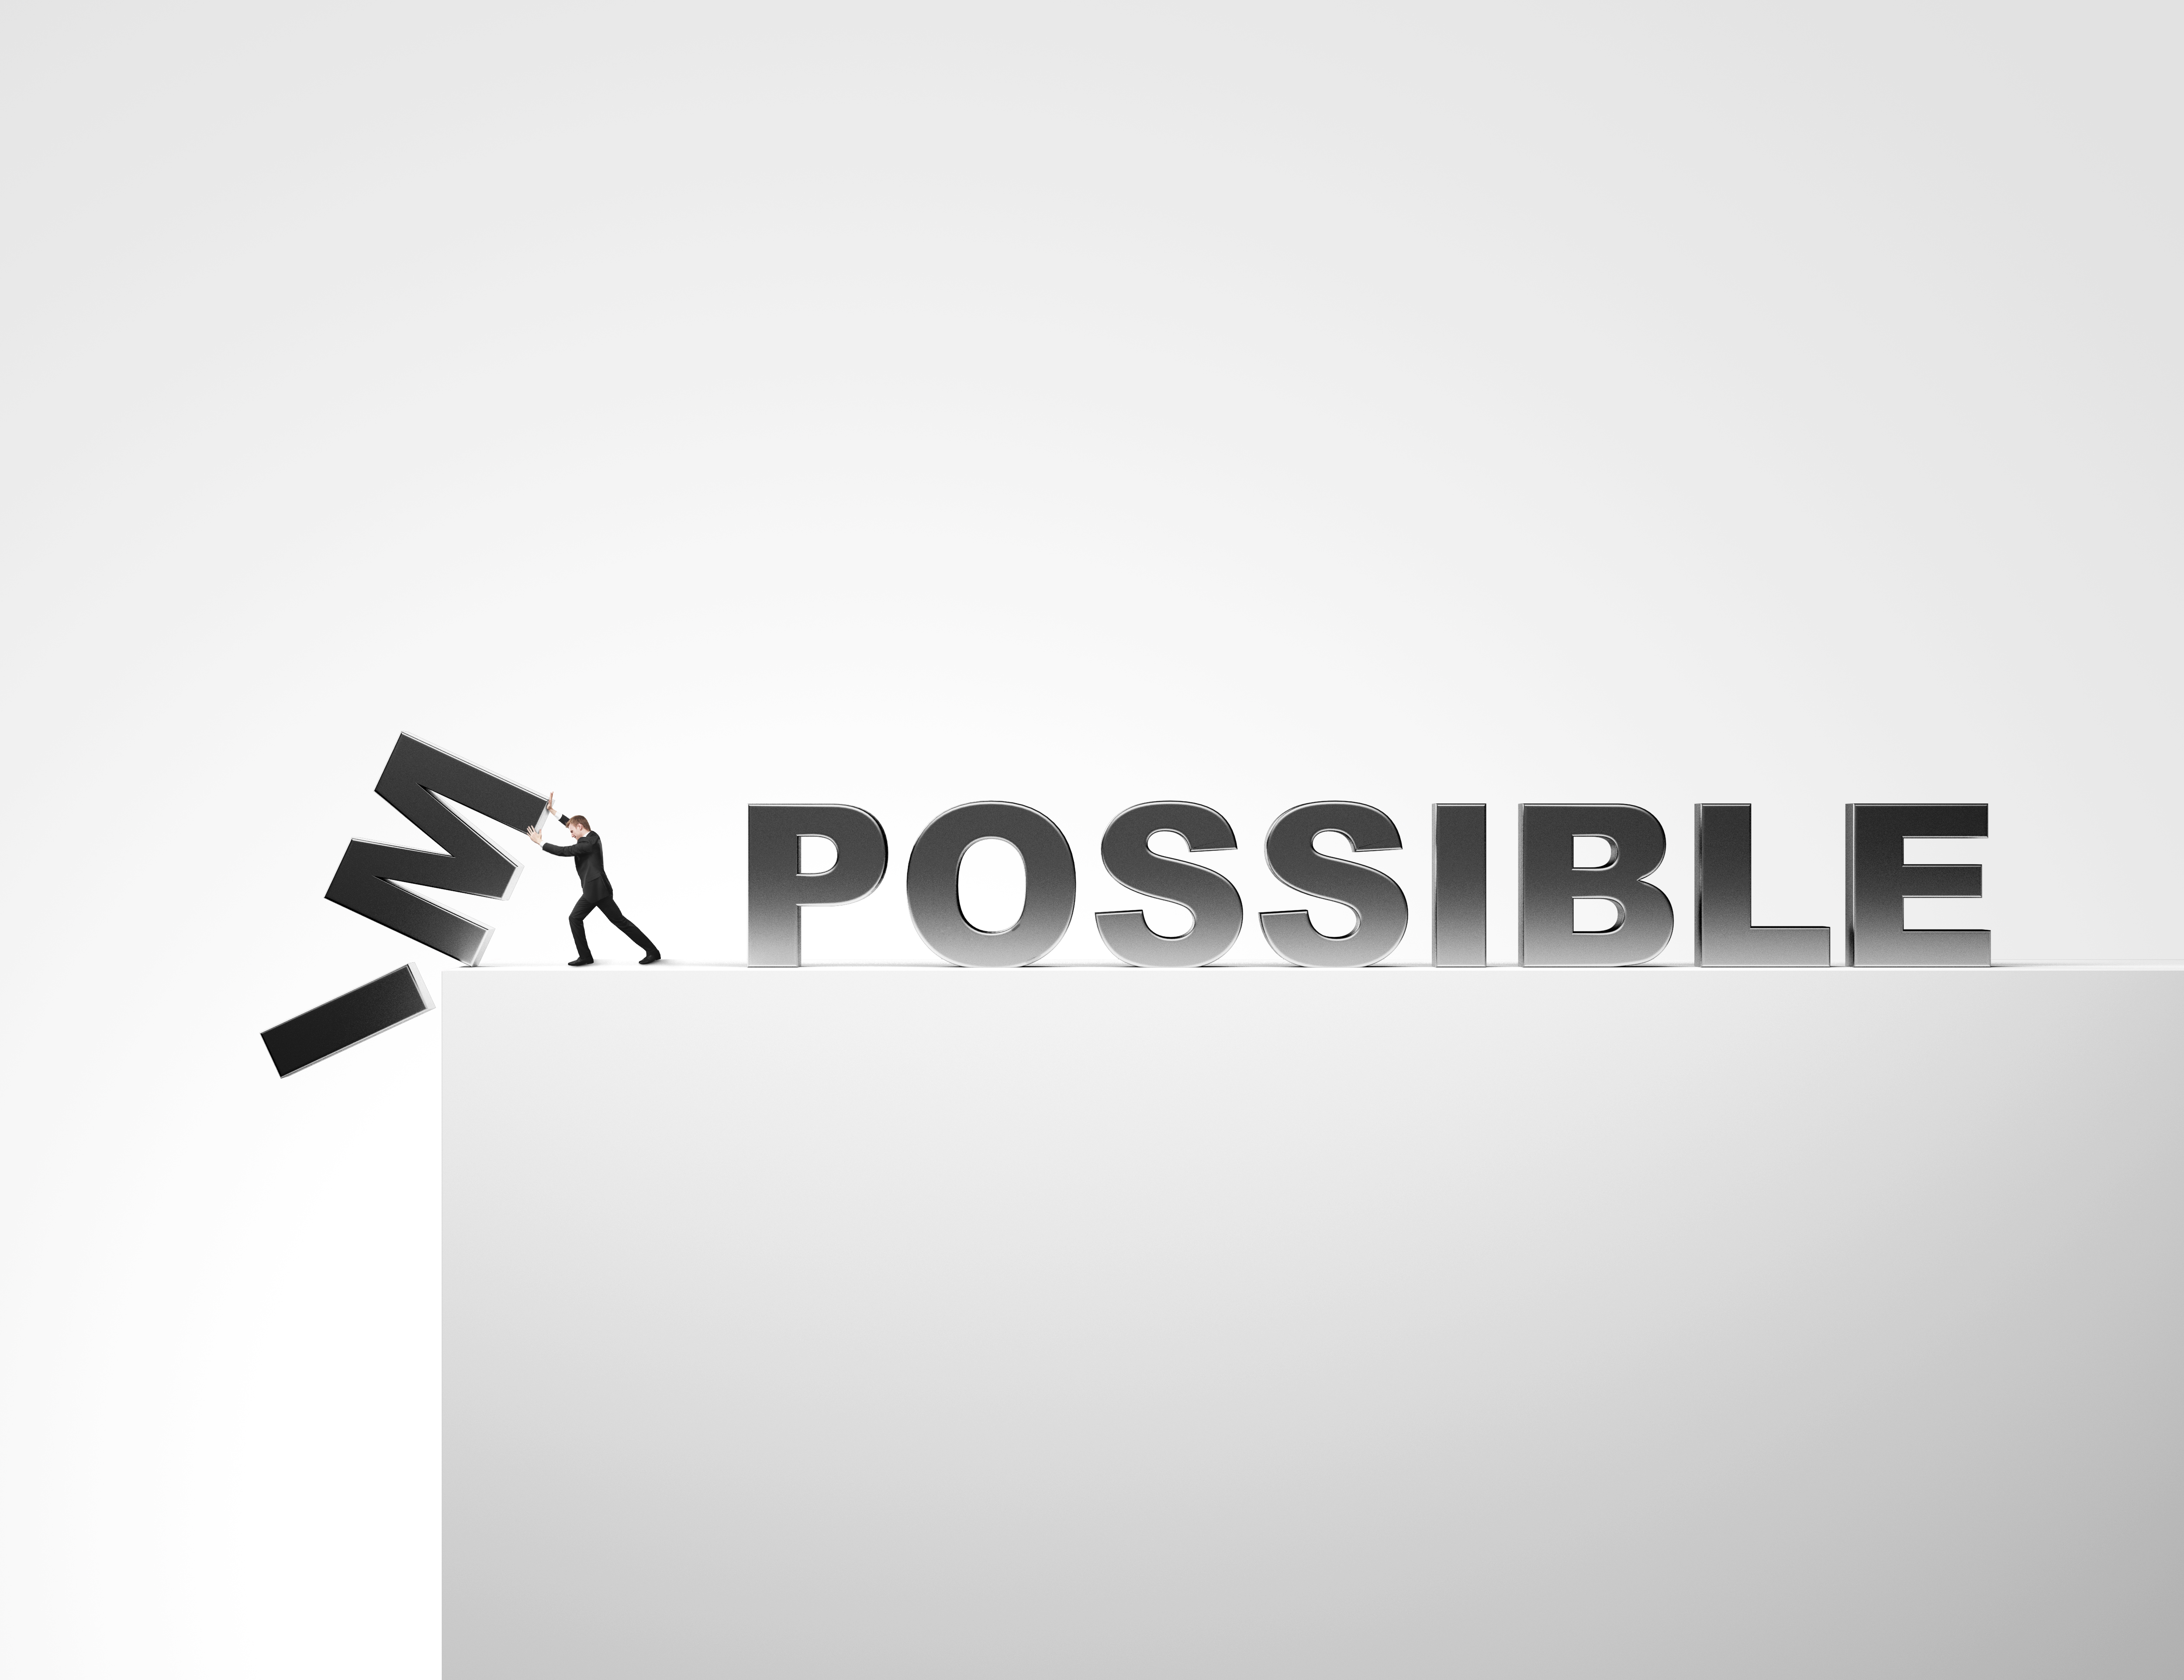 Impossible possible. Картинка Impossible possible. Impossible надпись. Impossible is possible. Possible компания.